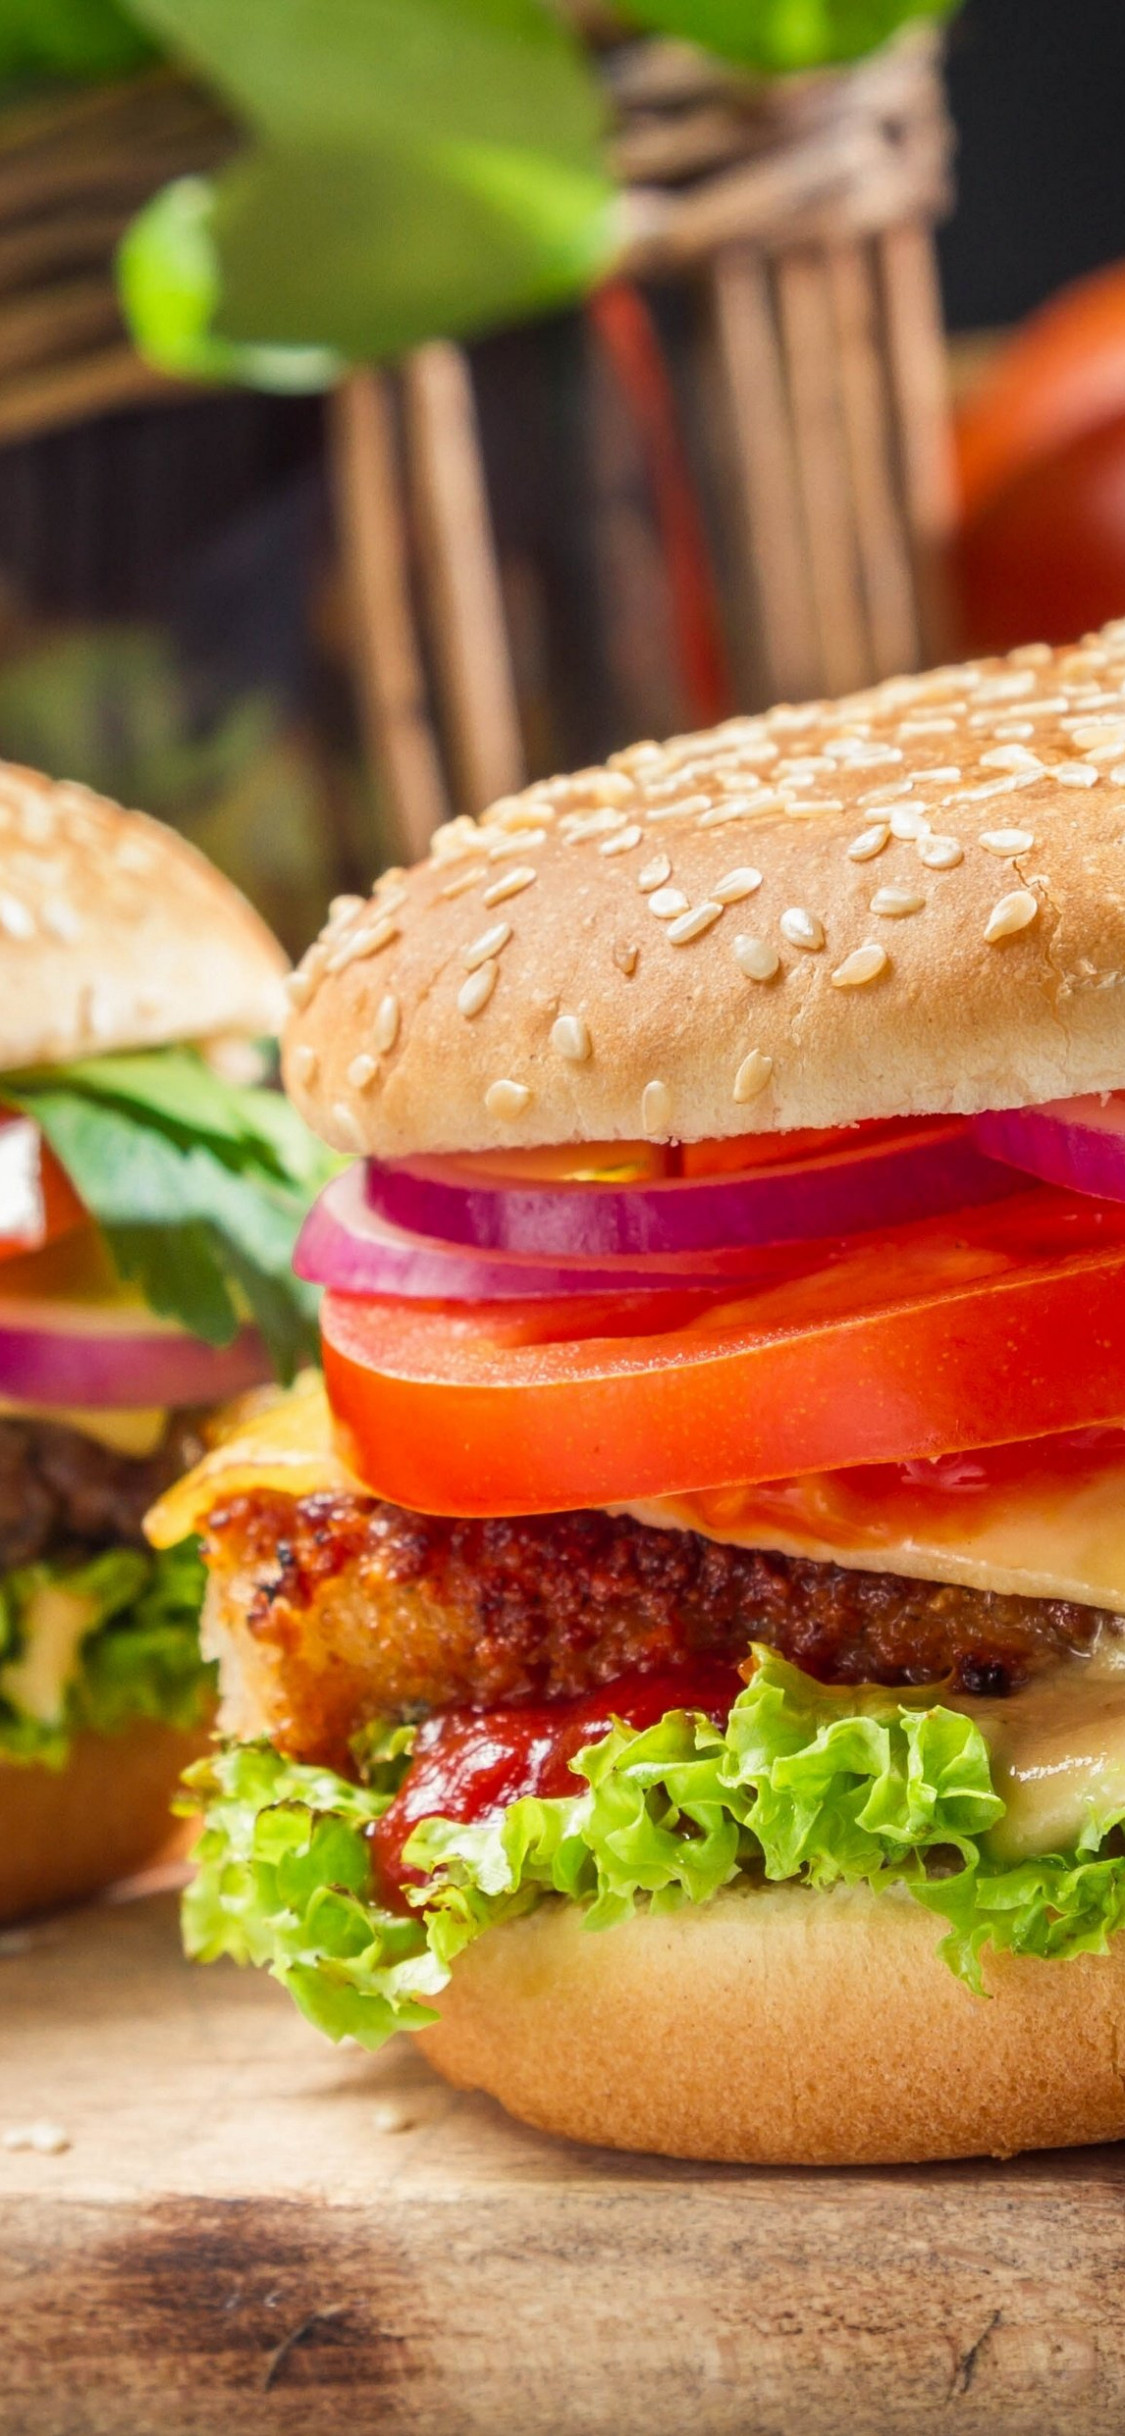 Hamburger: Ground beef combined with breadcrumbs, eggs, and seasonings. 1130x2440 HD Background.